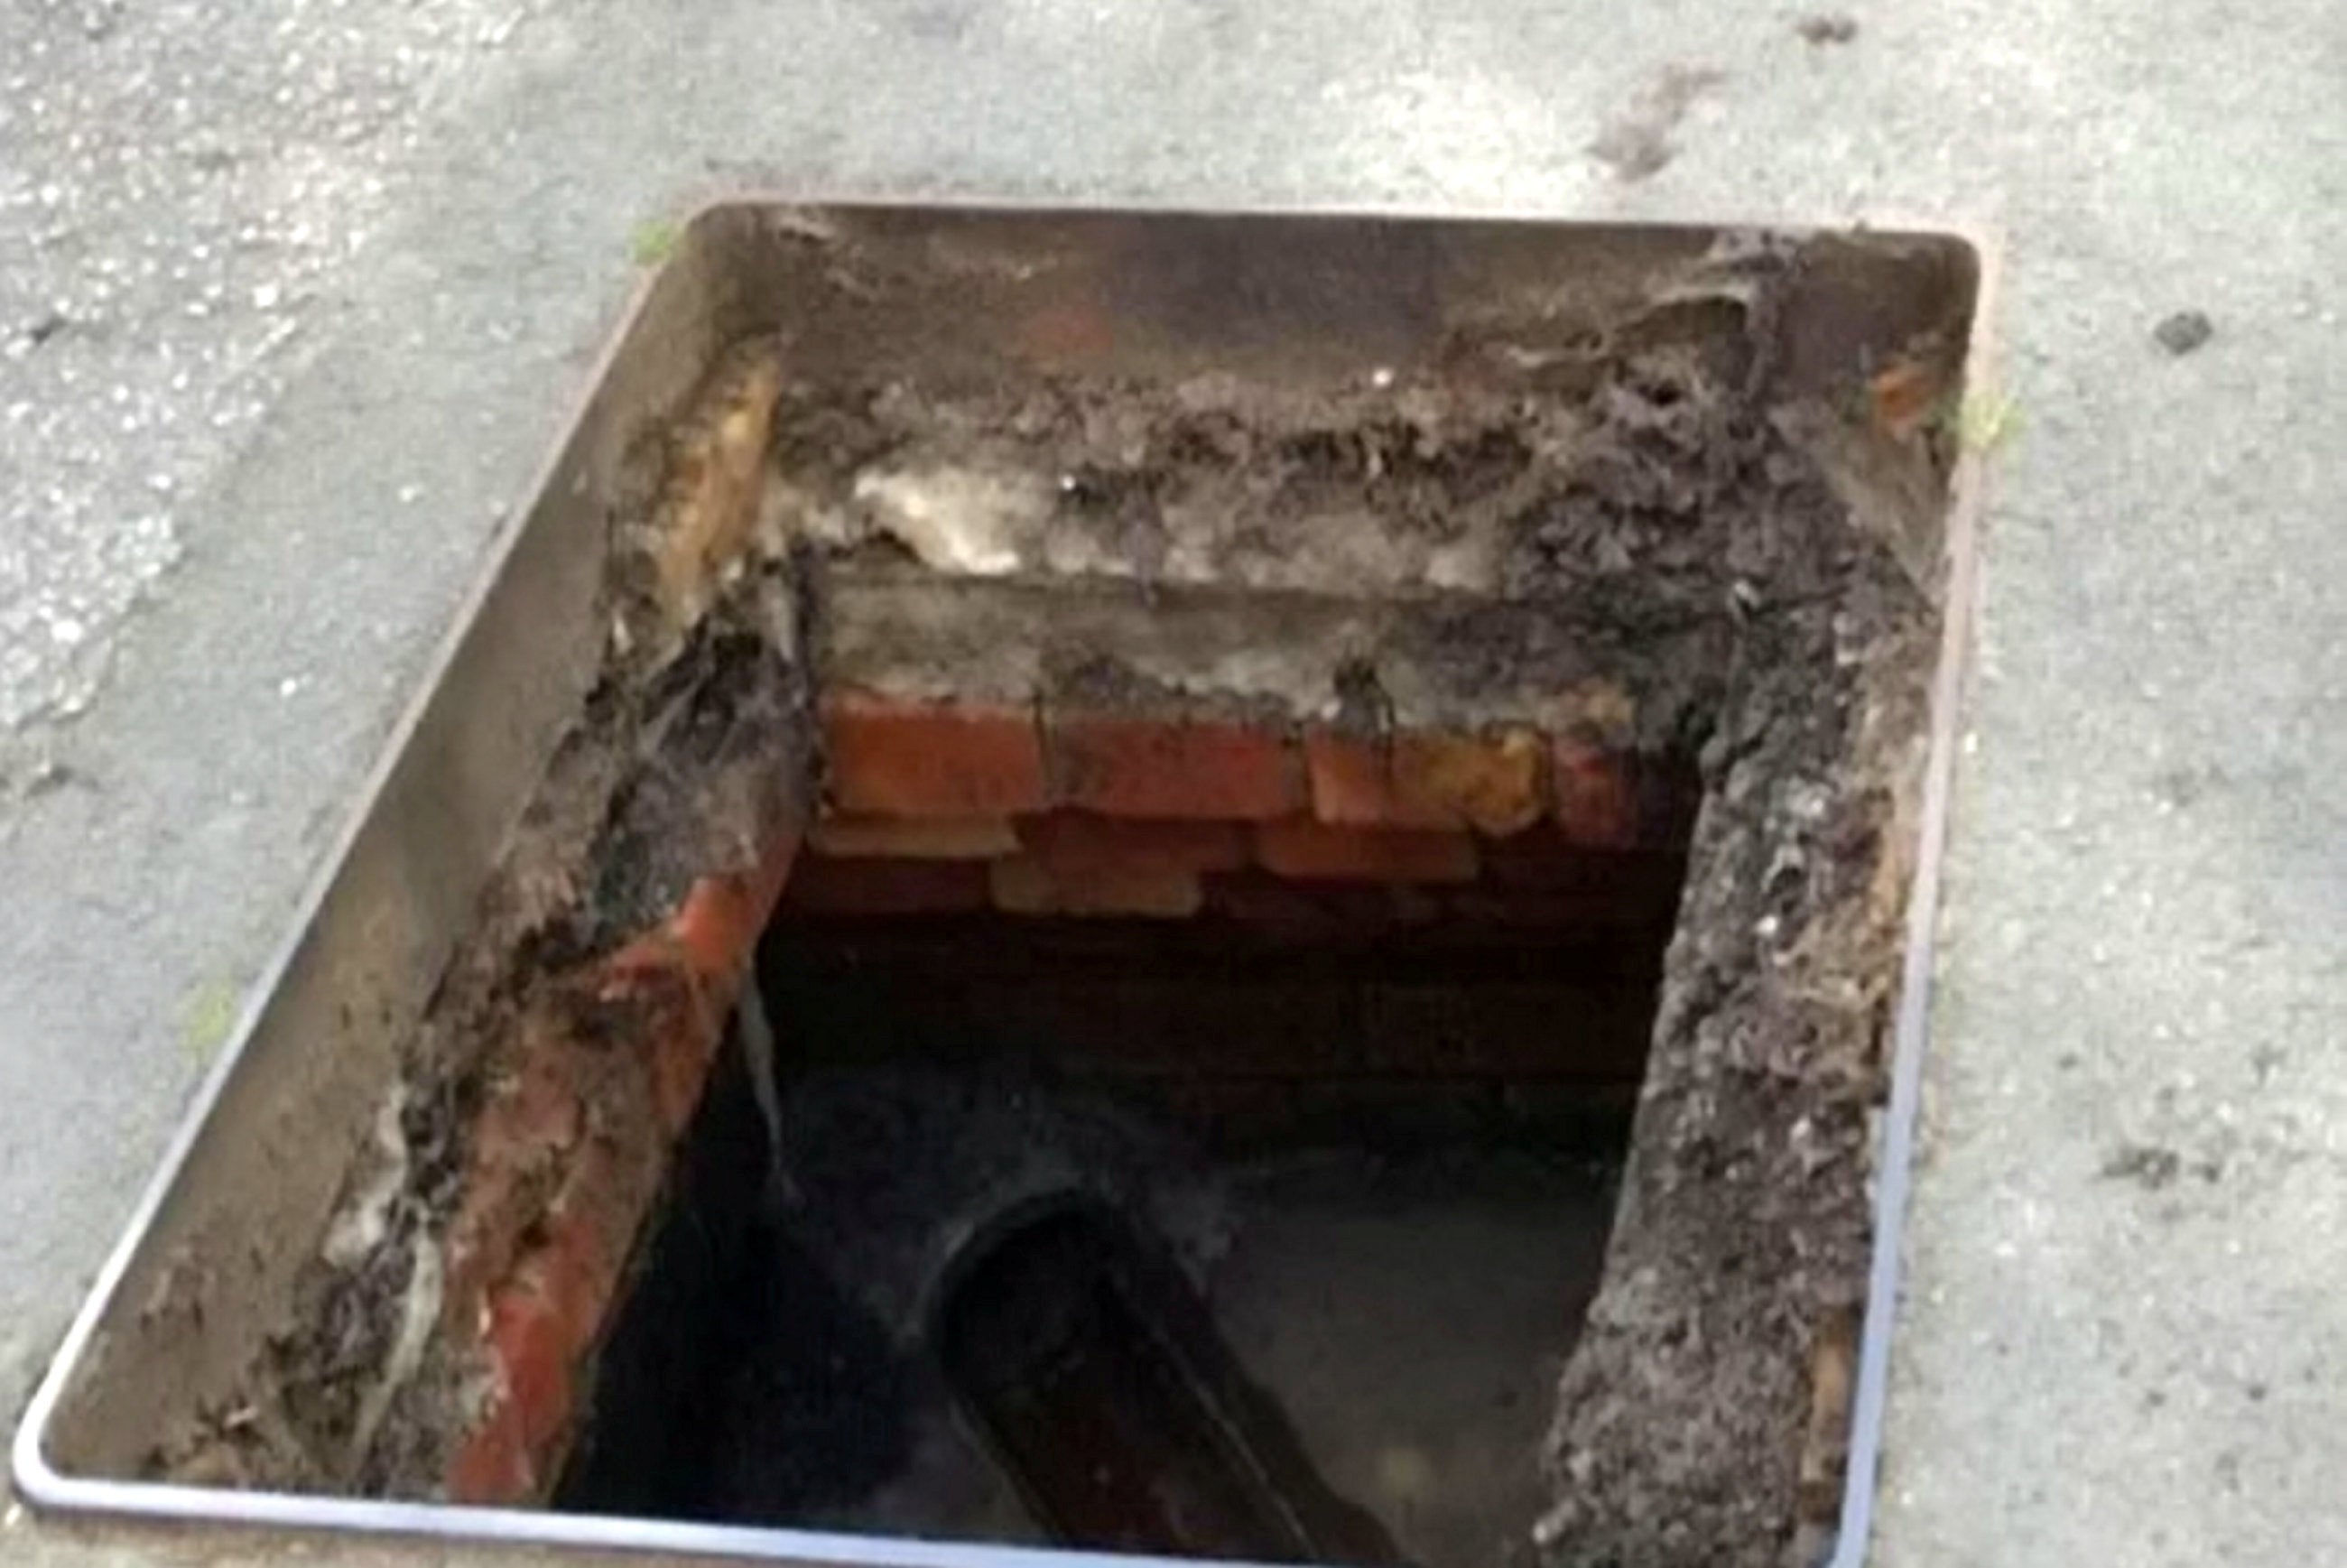 Police are appealing for information after thieves stole more than 160 drain covers in the space of just four days - amid fears of a national trend